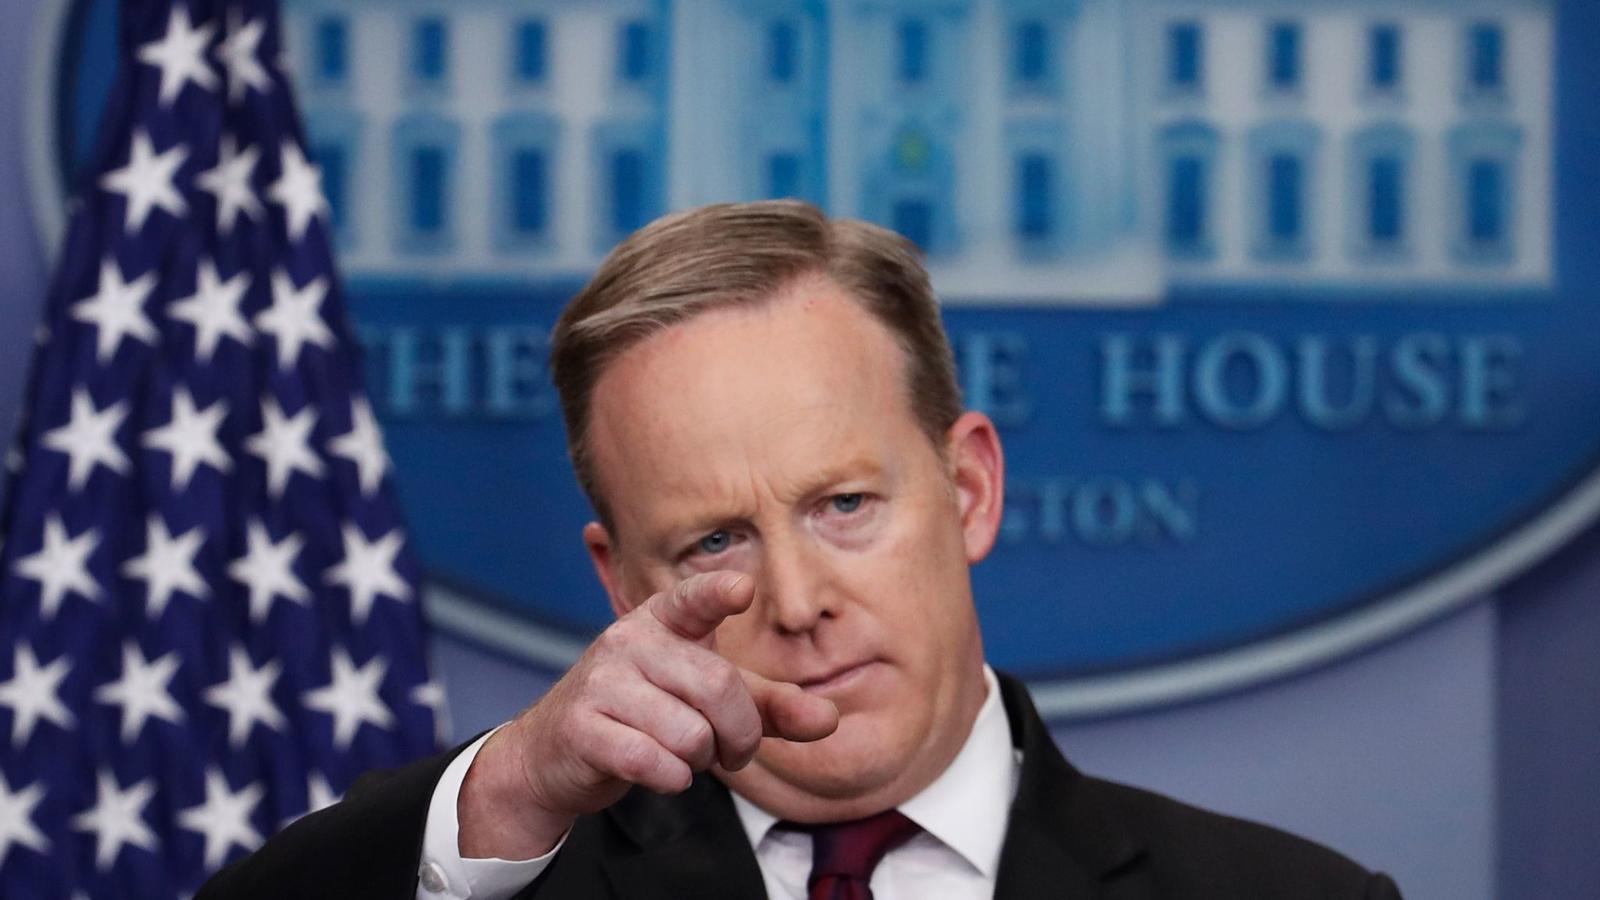 White house blocks news organizations from press briefings